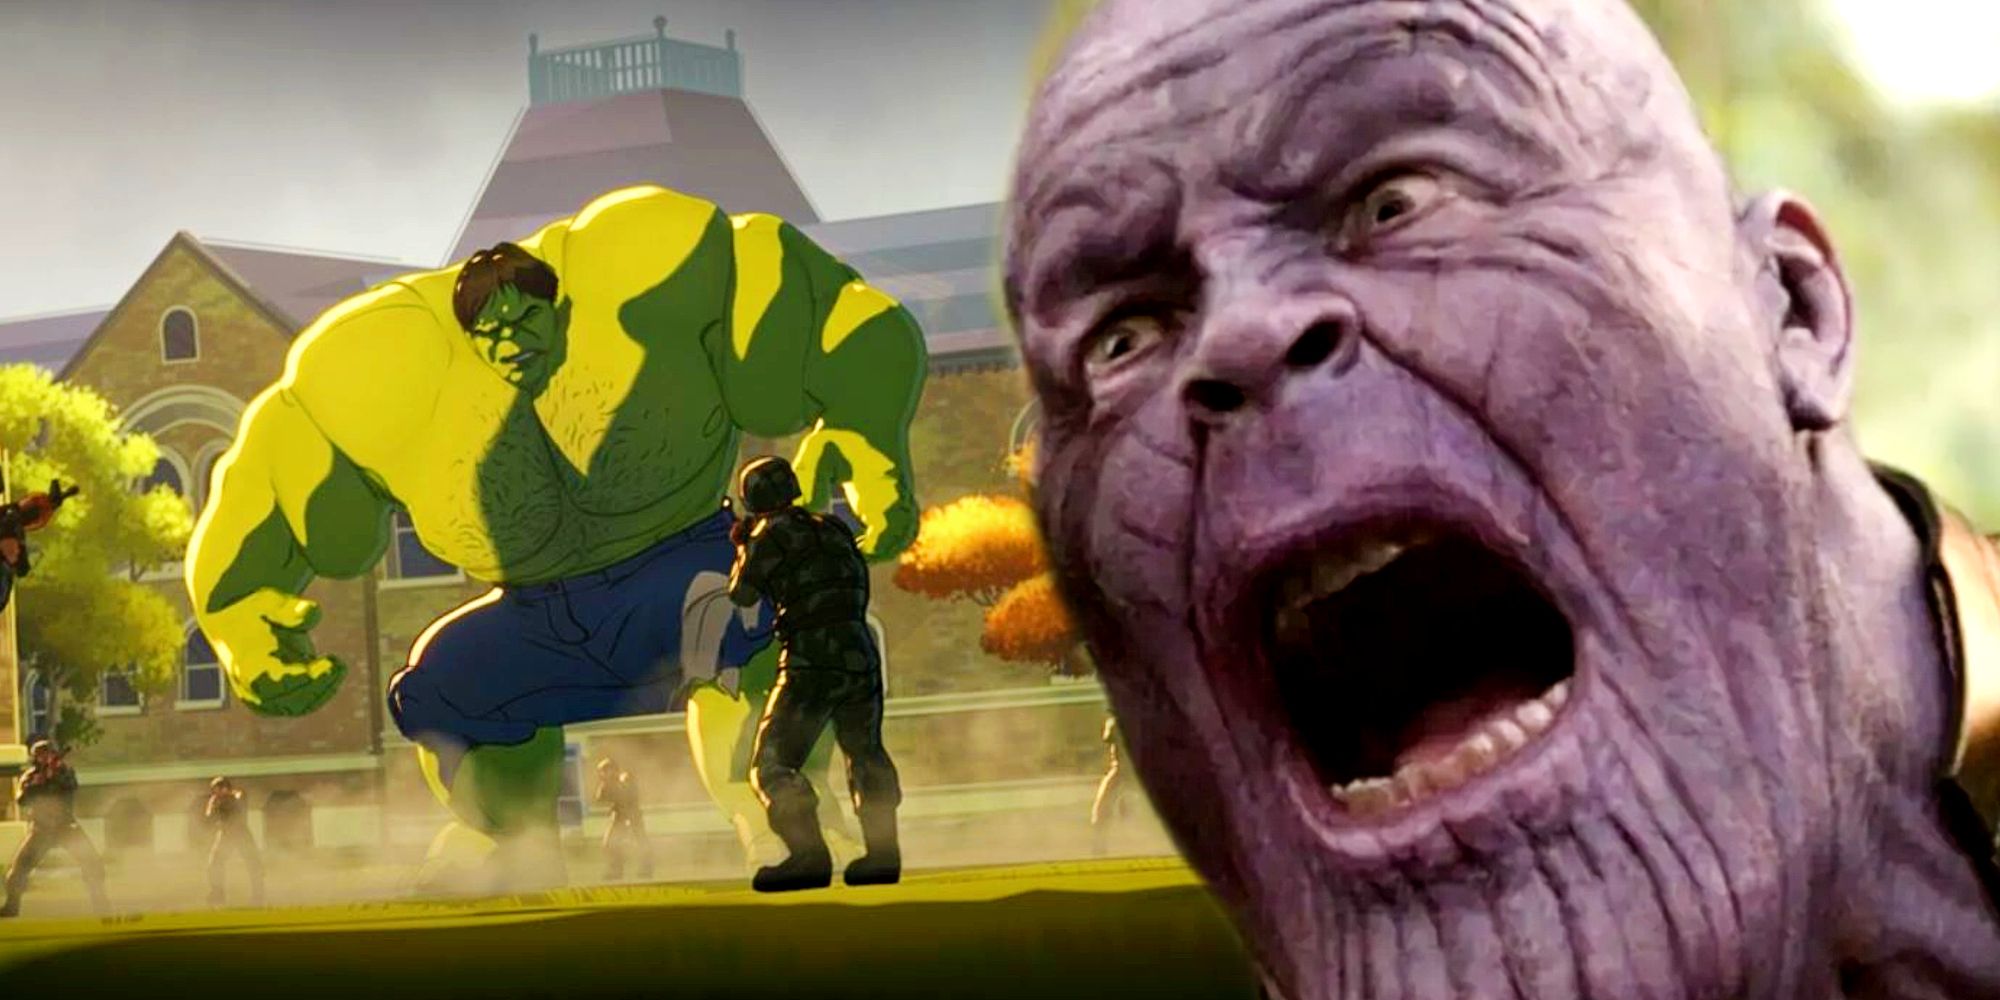 Thanos in Avengers Infinity War and Hulk in What If